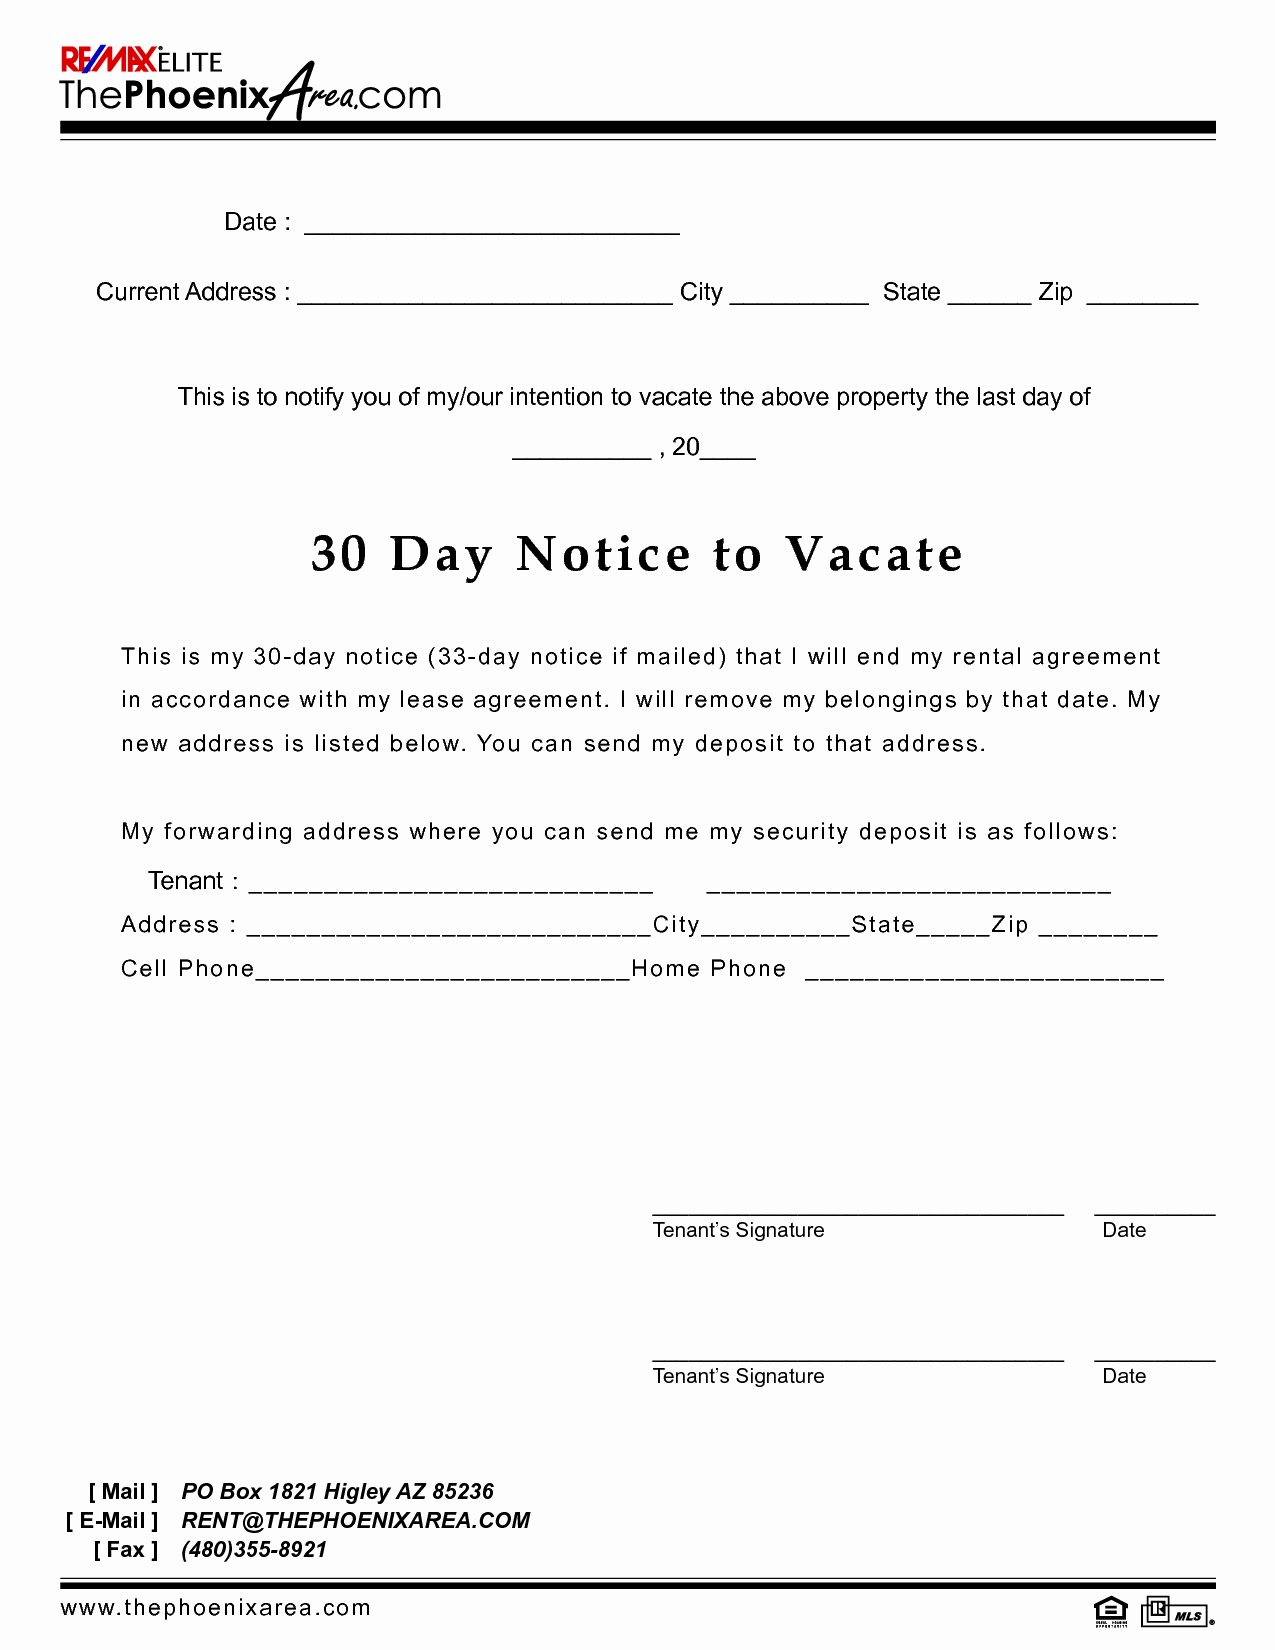 Free Printable 30 Day Eviction Notice Template Awesome Best S Of 30 Day Eviction Letter Template 30 Day